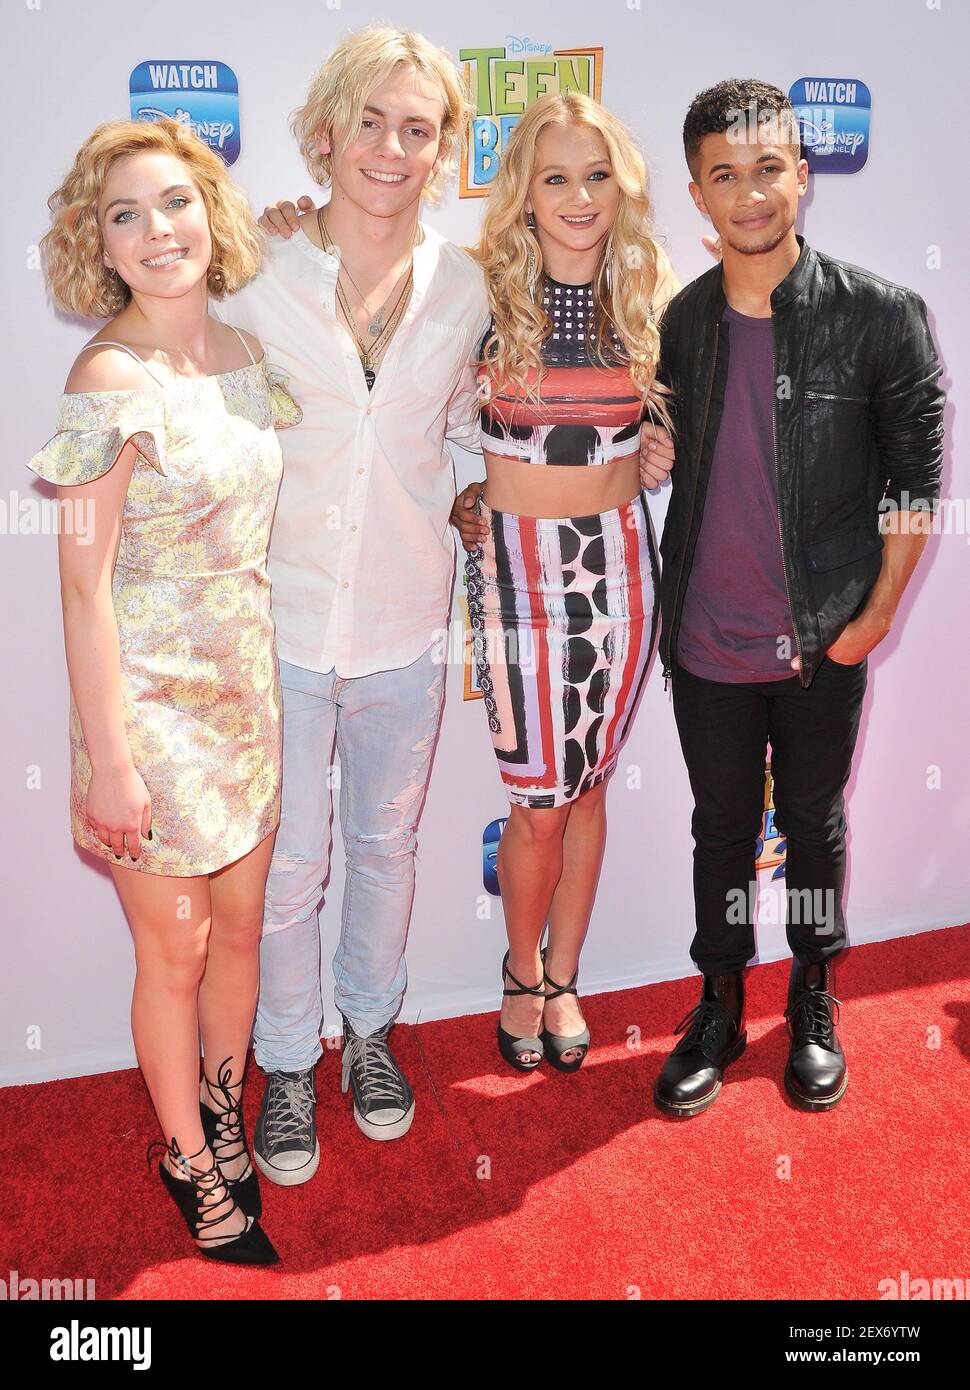 L-R) Phipps, Ross Lynch, Mollee Gray and Fisher arrives at The Disney Channel's "Teen Beach 2" Los Angeles Premiere held the Walt Disney Studios in Burbank, CA on Monday